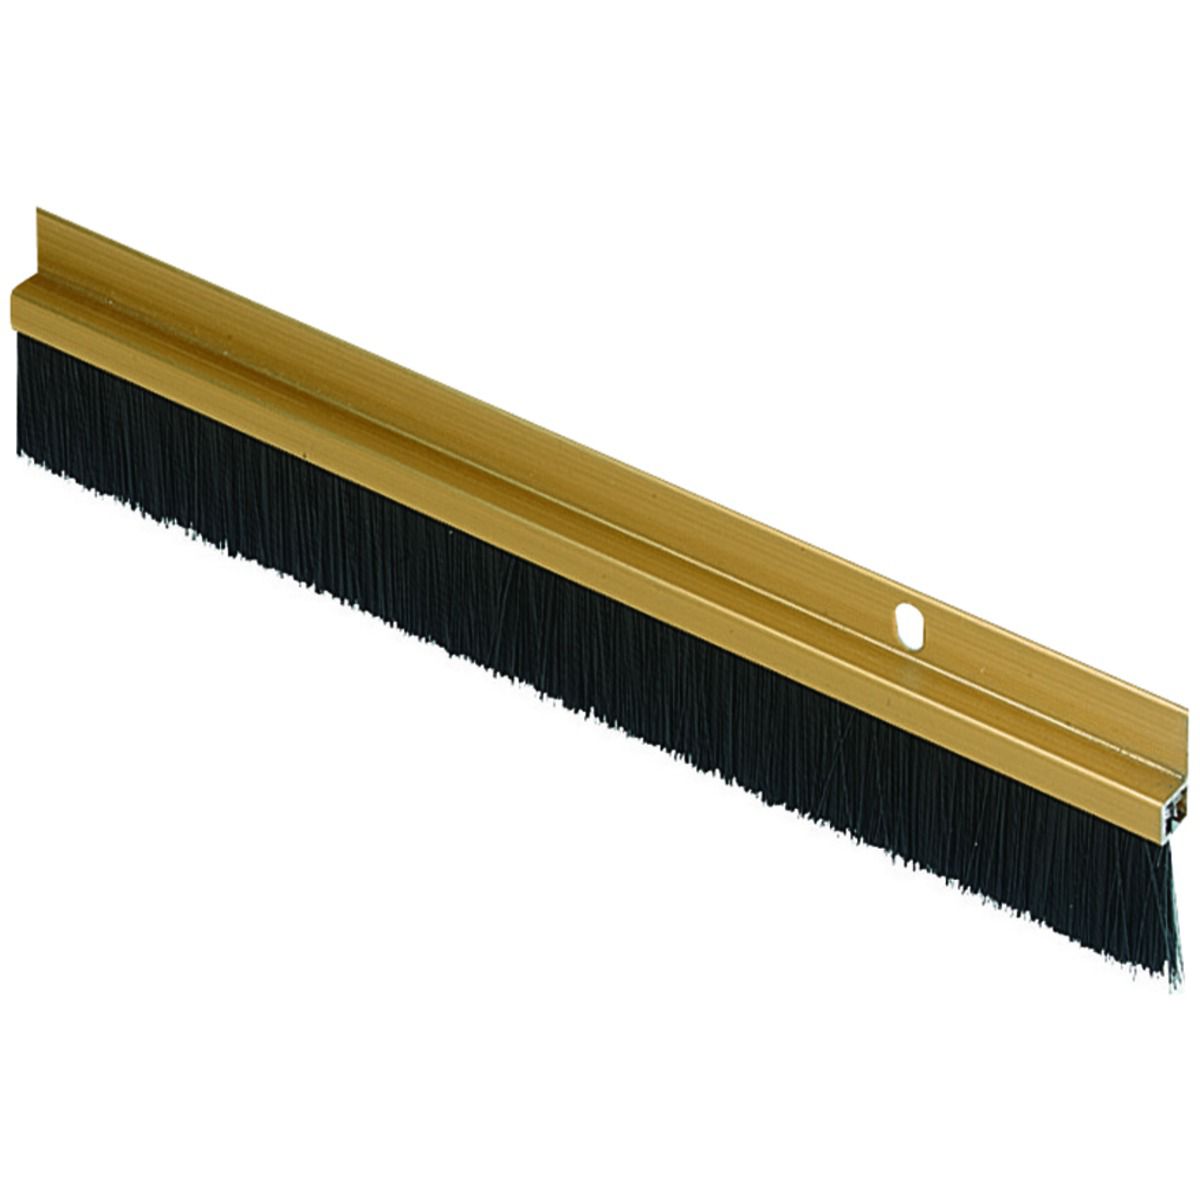 Image of Wickes 838mm Door Brush Draught Excluder - Gold Effect